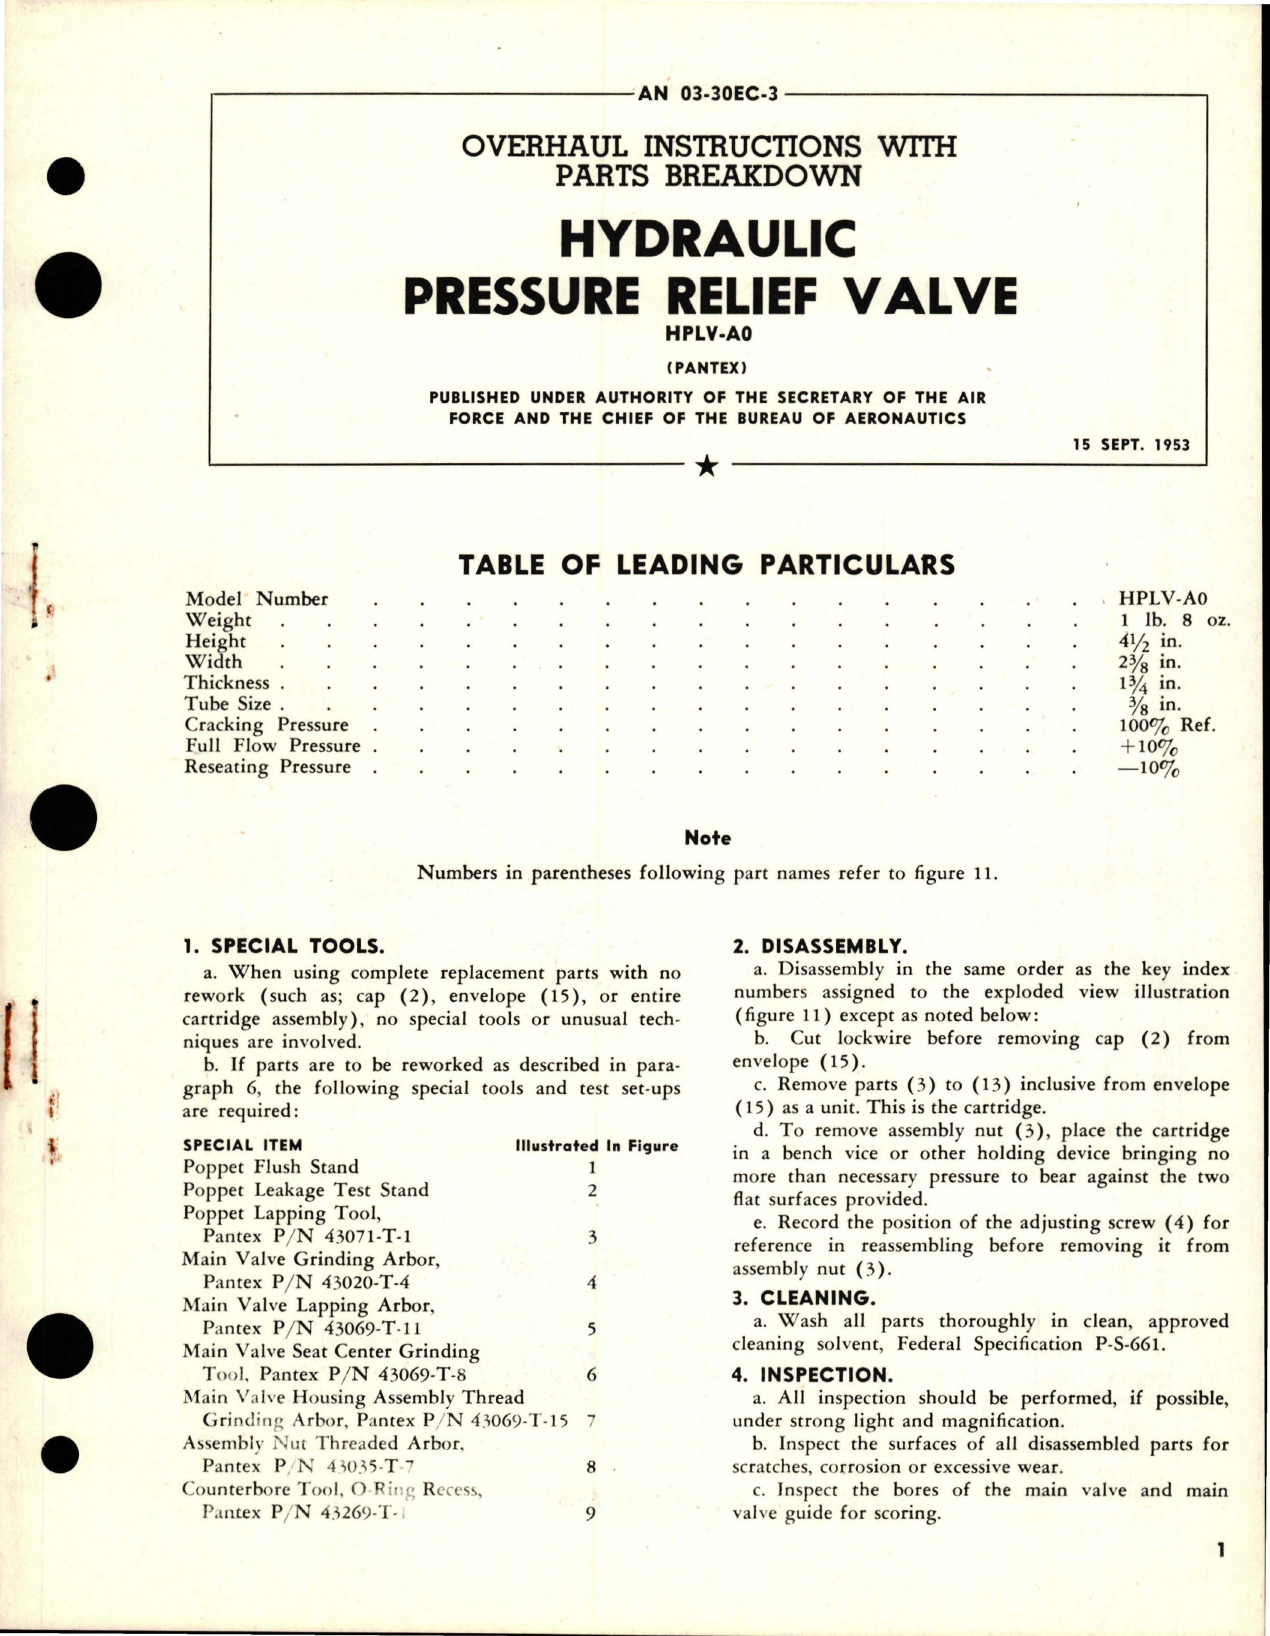 Sample page 1 from AirCorps Library document: Overhaul Instructions with Parts for Hydraulic Pressure Relief Valve - HPLV-A0